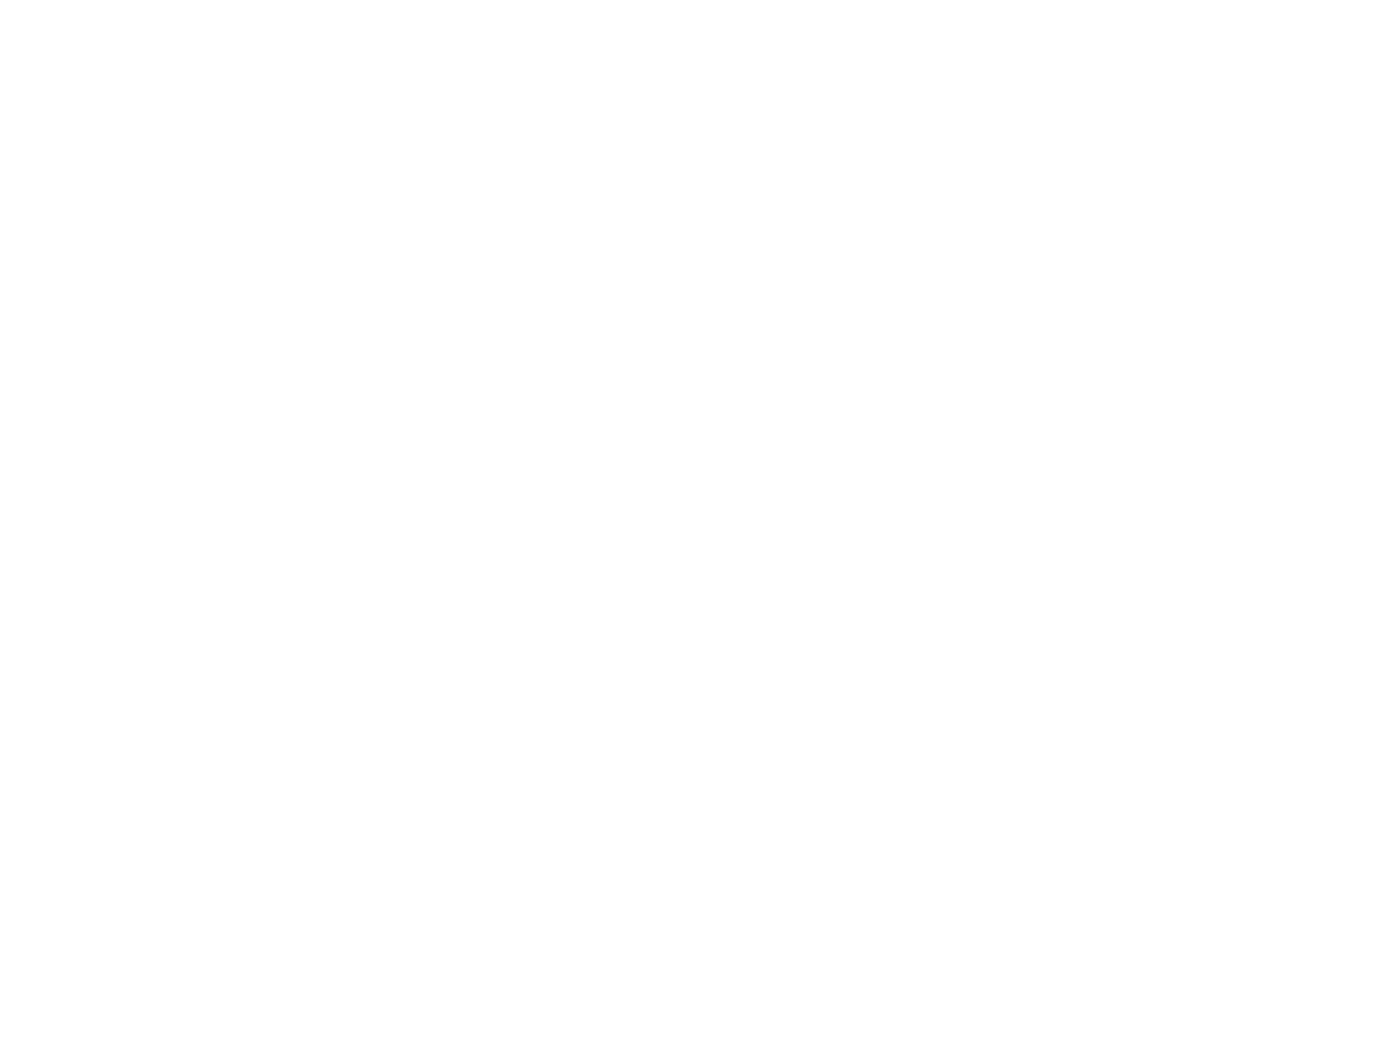 GFX100S 102MP × LARGE FORMAT HIGH MOBILITY